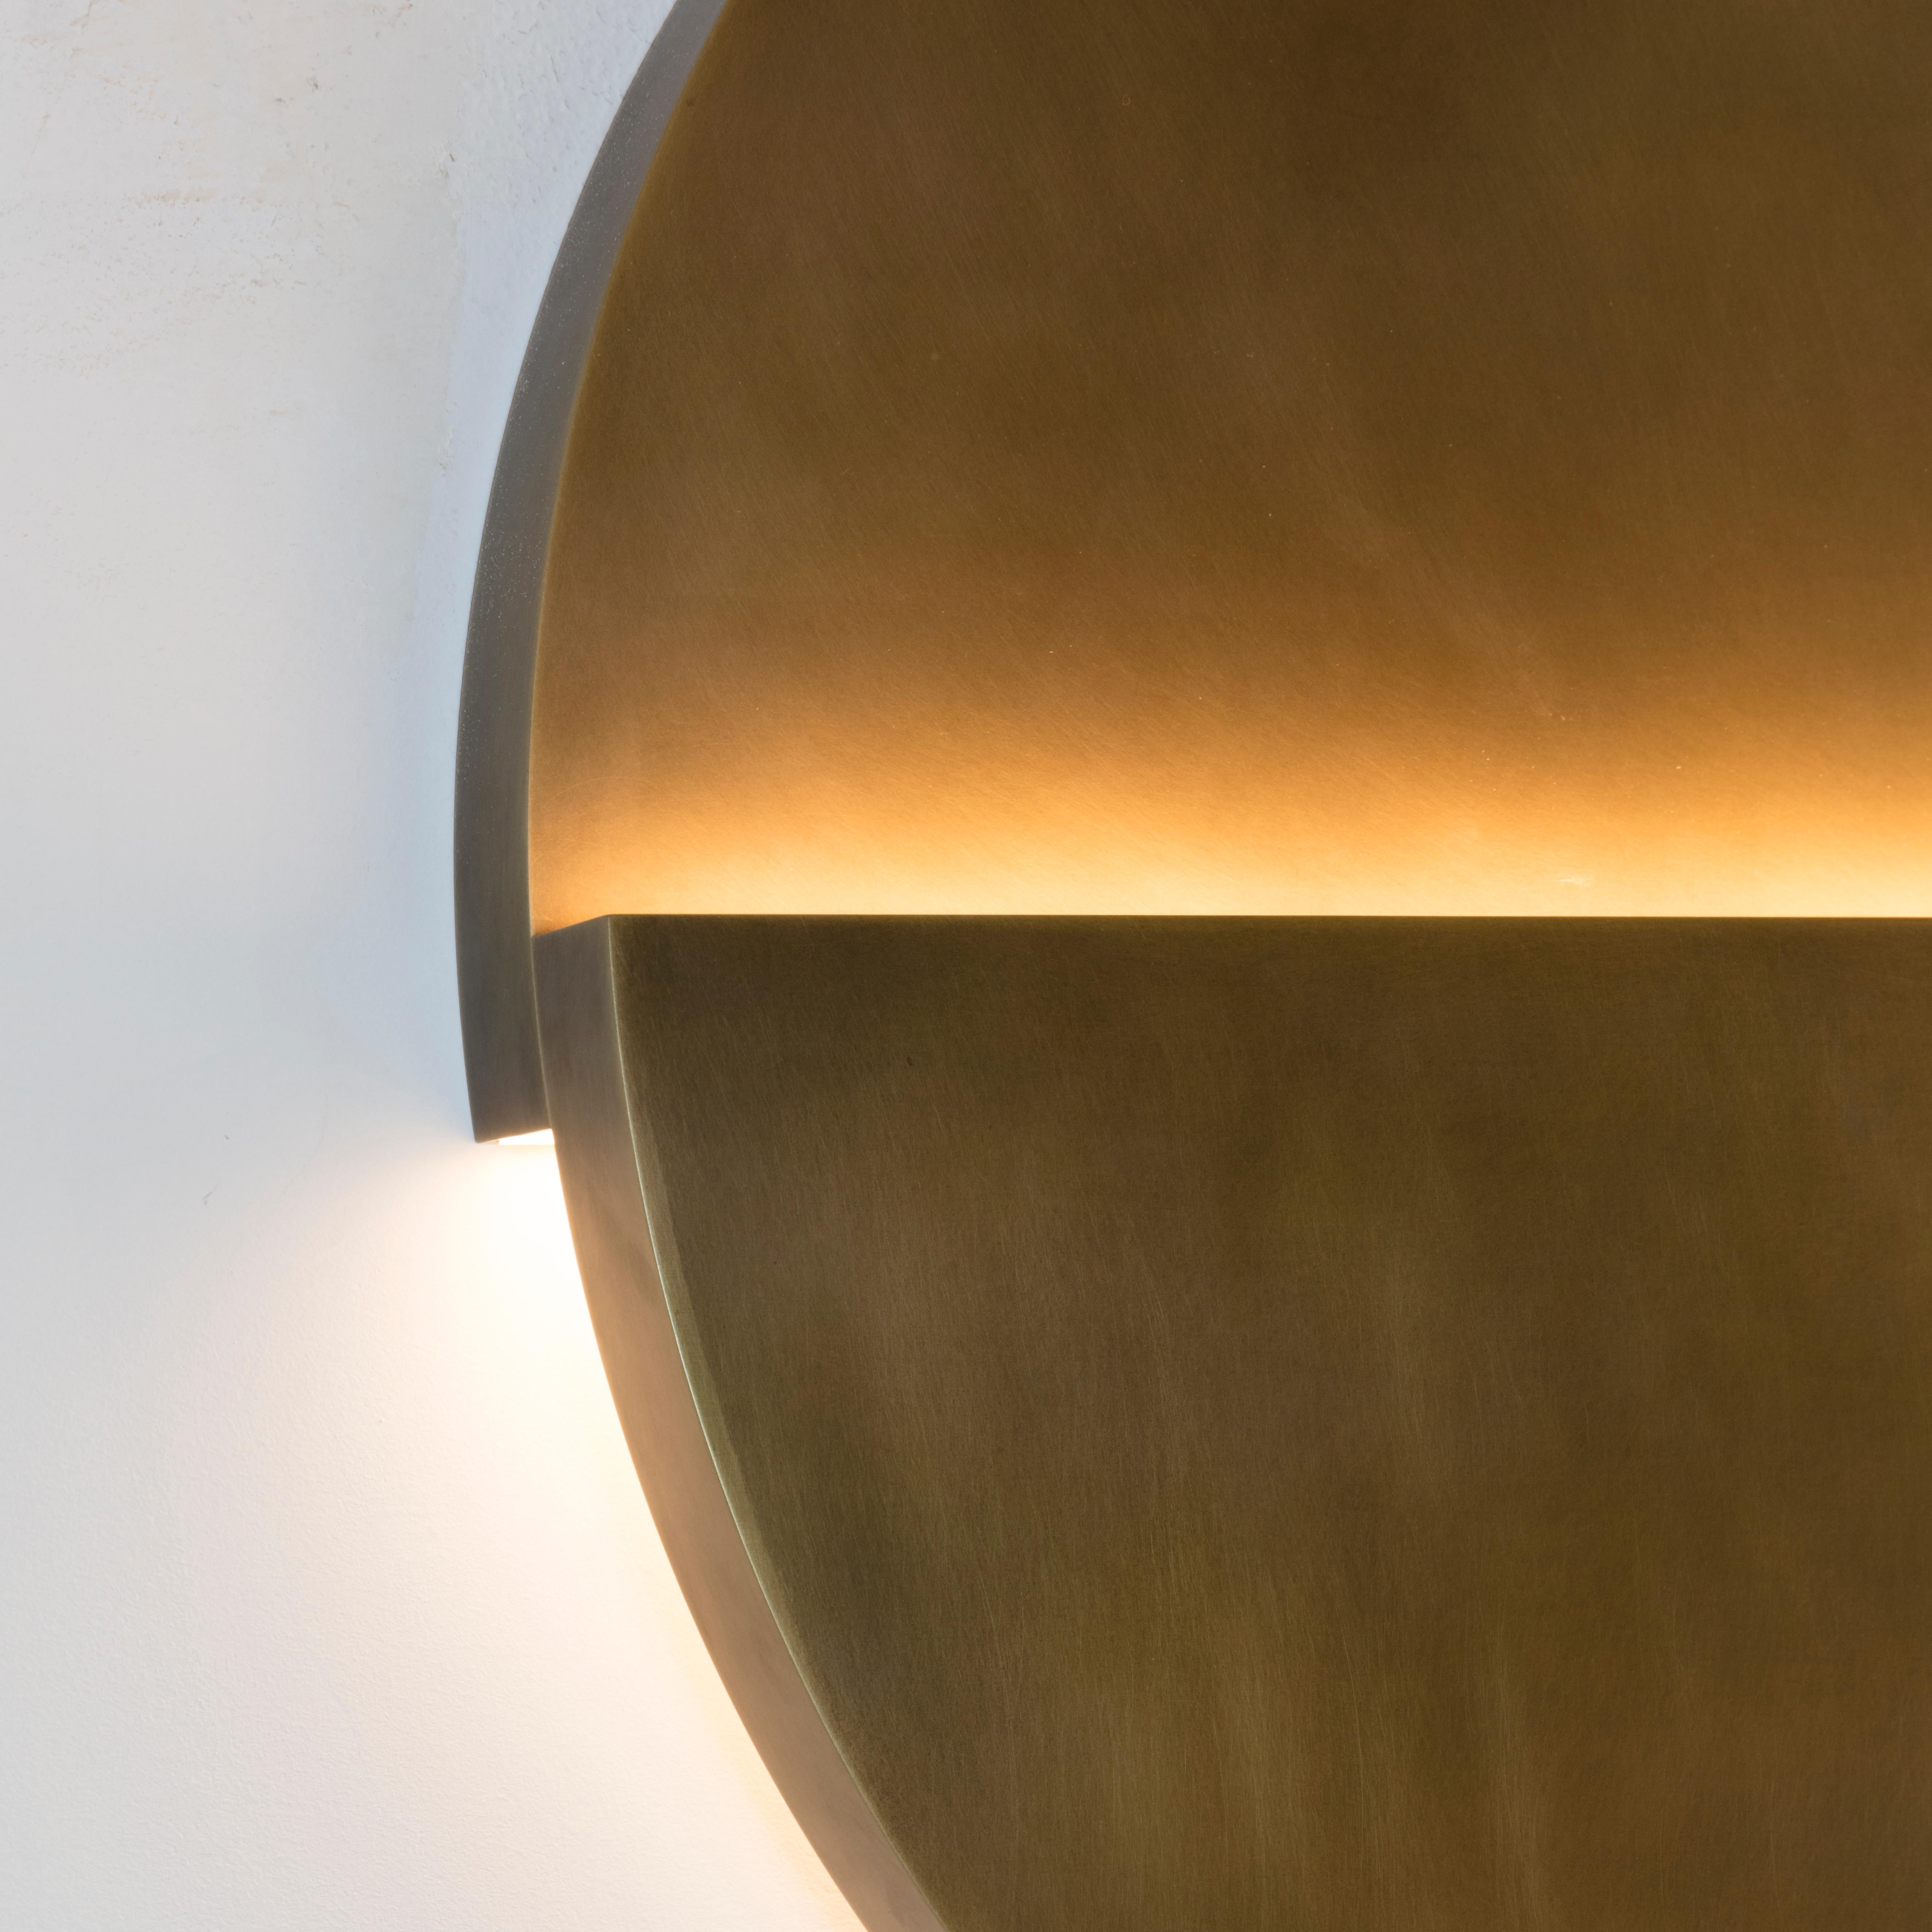 Part of the Cycladic Series, exploring the power of architecture brought to small scale. The circle sconce illuminates the purity, symbolism and intimate power of the circle: one of the most emblematic, elemental geometric forms expressed in both